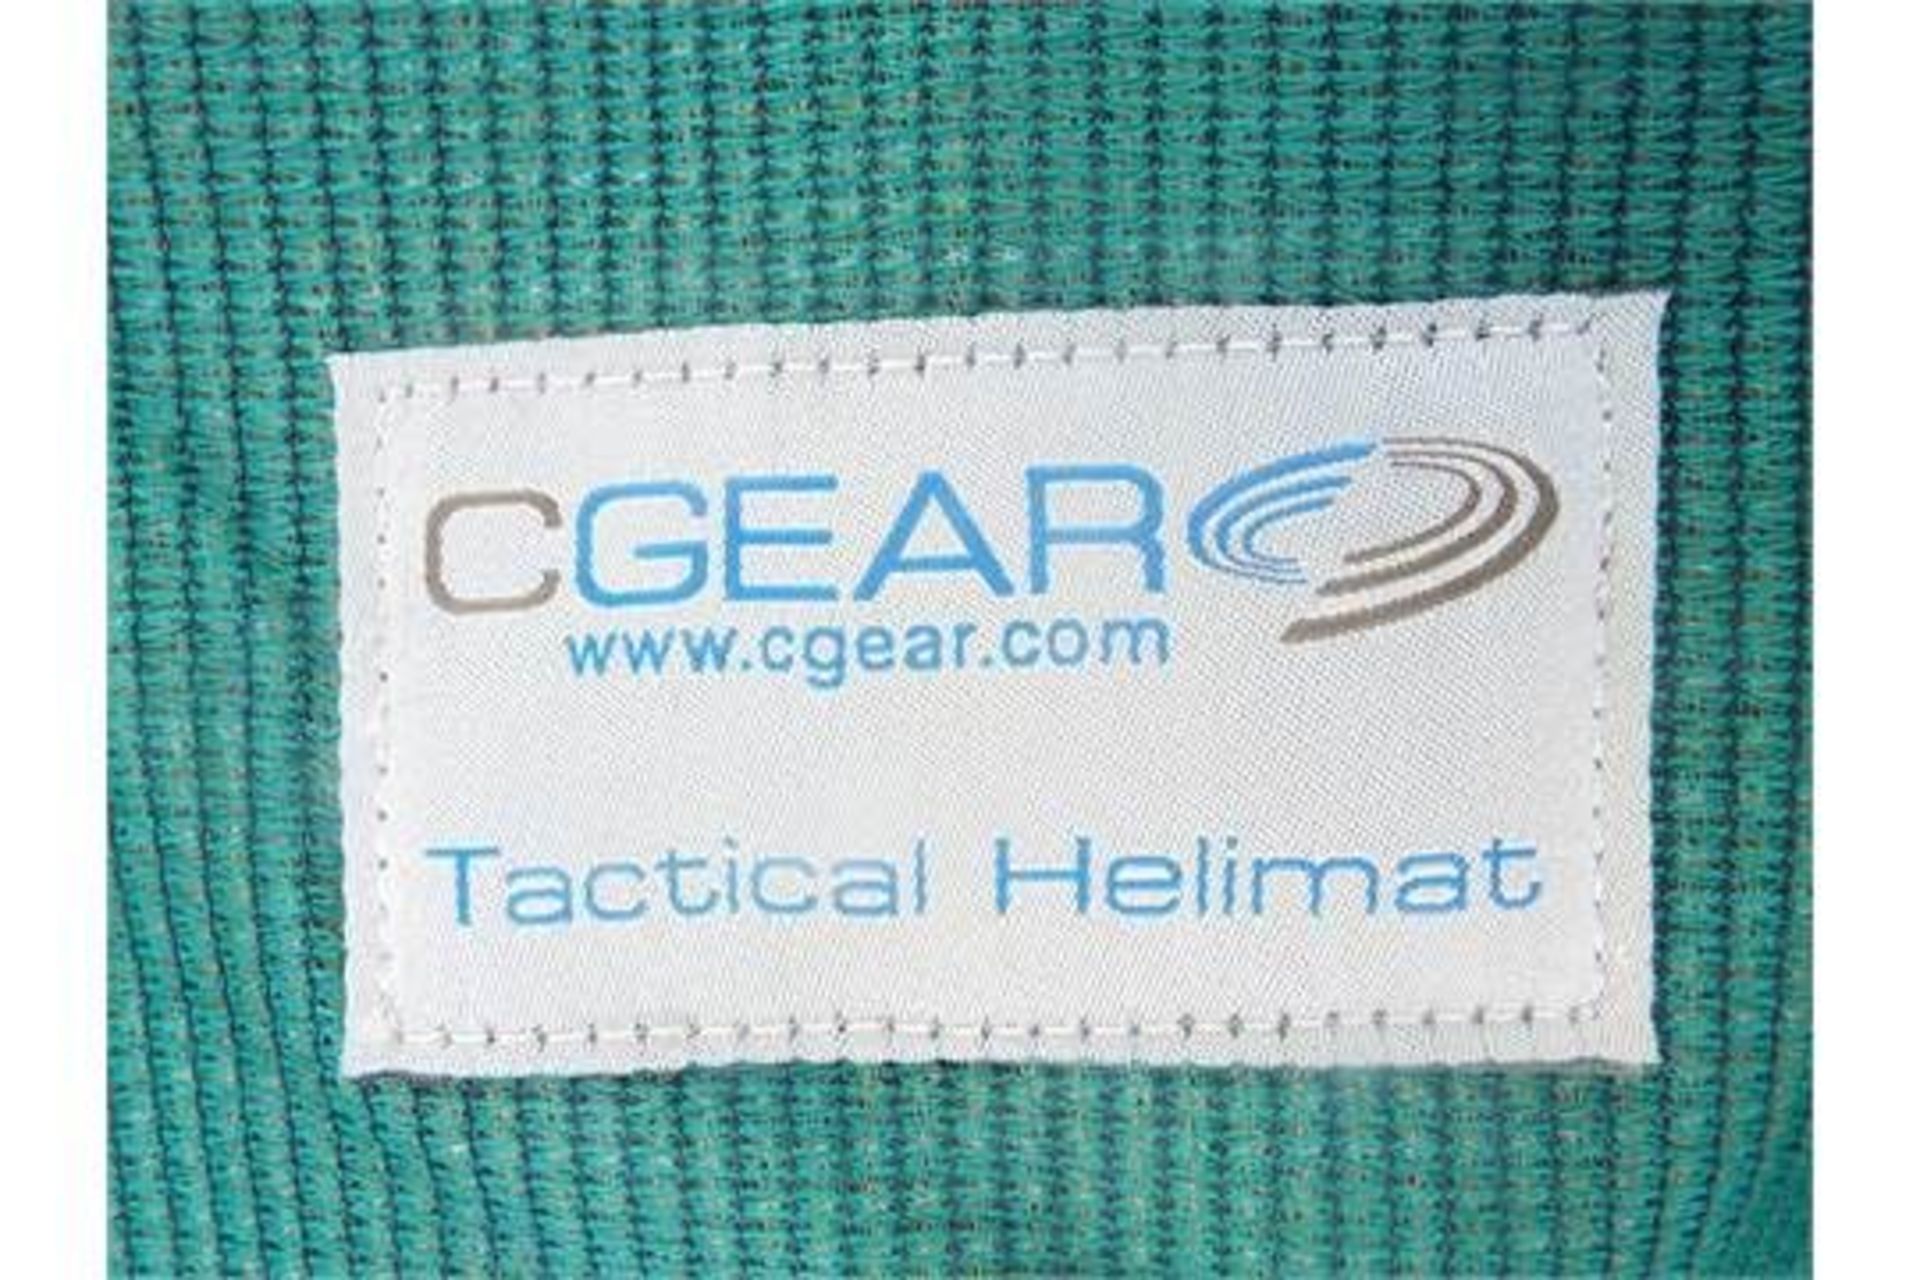 CGear Tactical Helimat 6m x 6m - Image 4 of 5